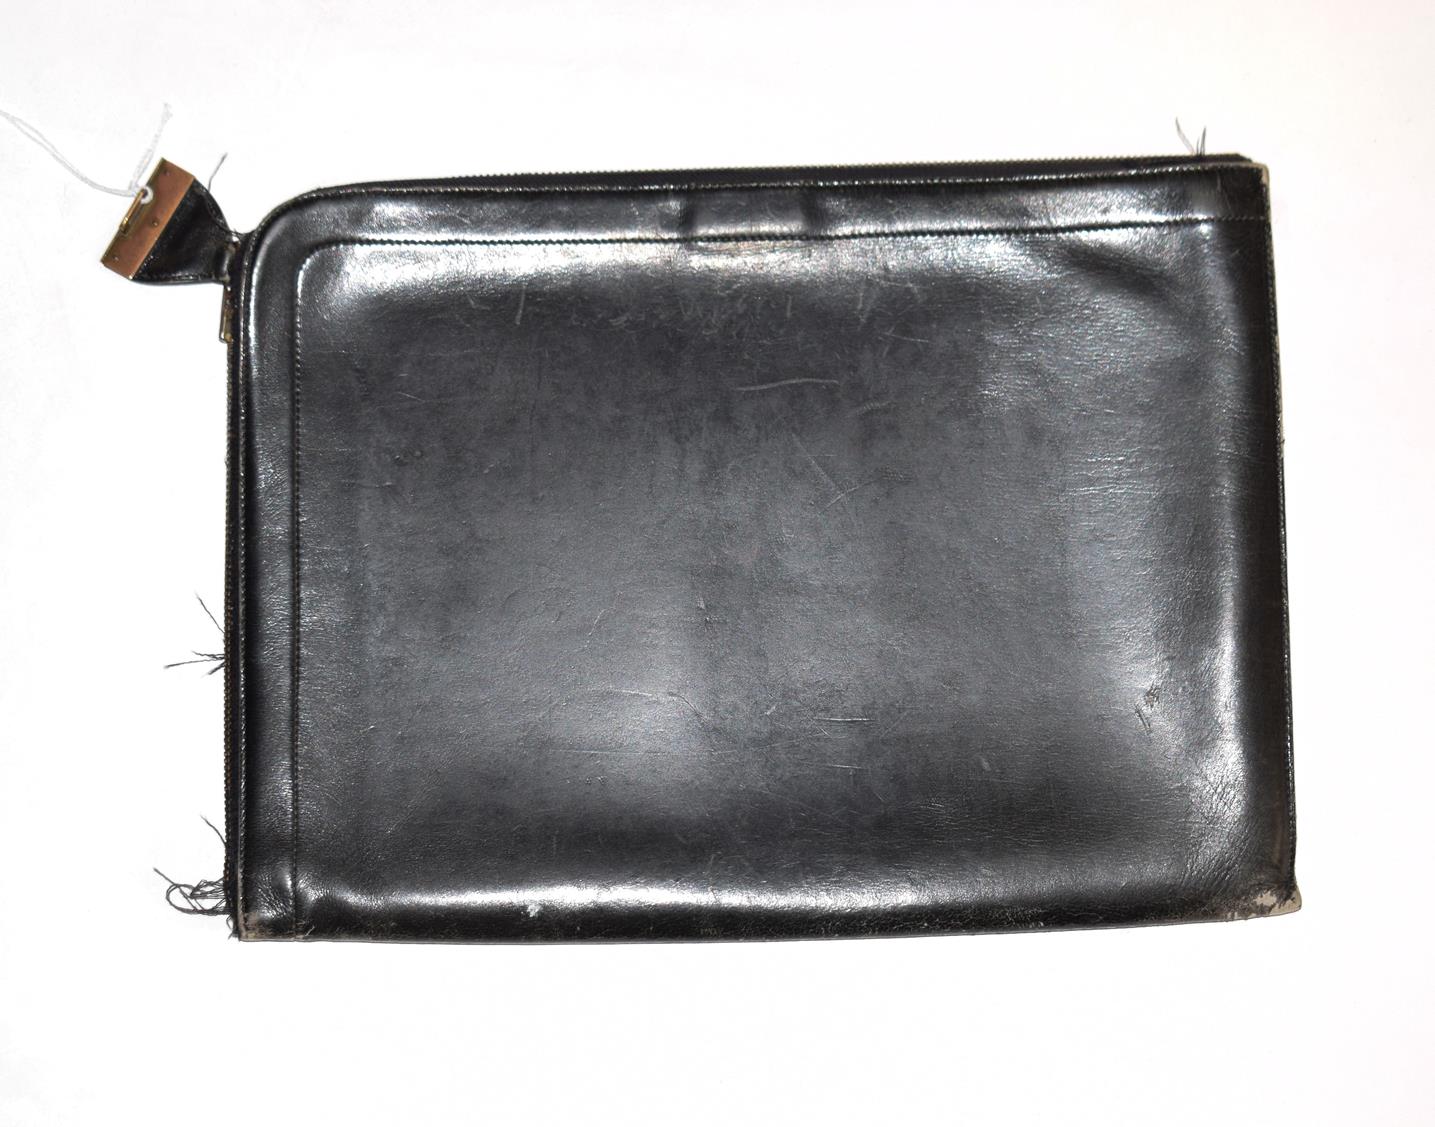 Hermes black leather document case, with zip around the outer edge, brass lock stamped 'Hermes